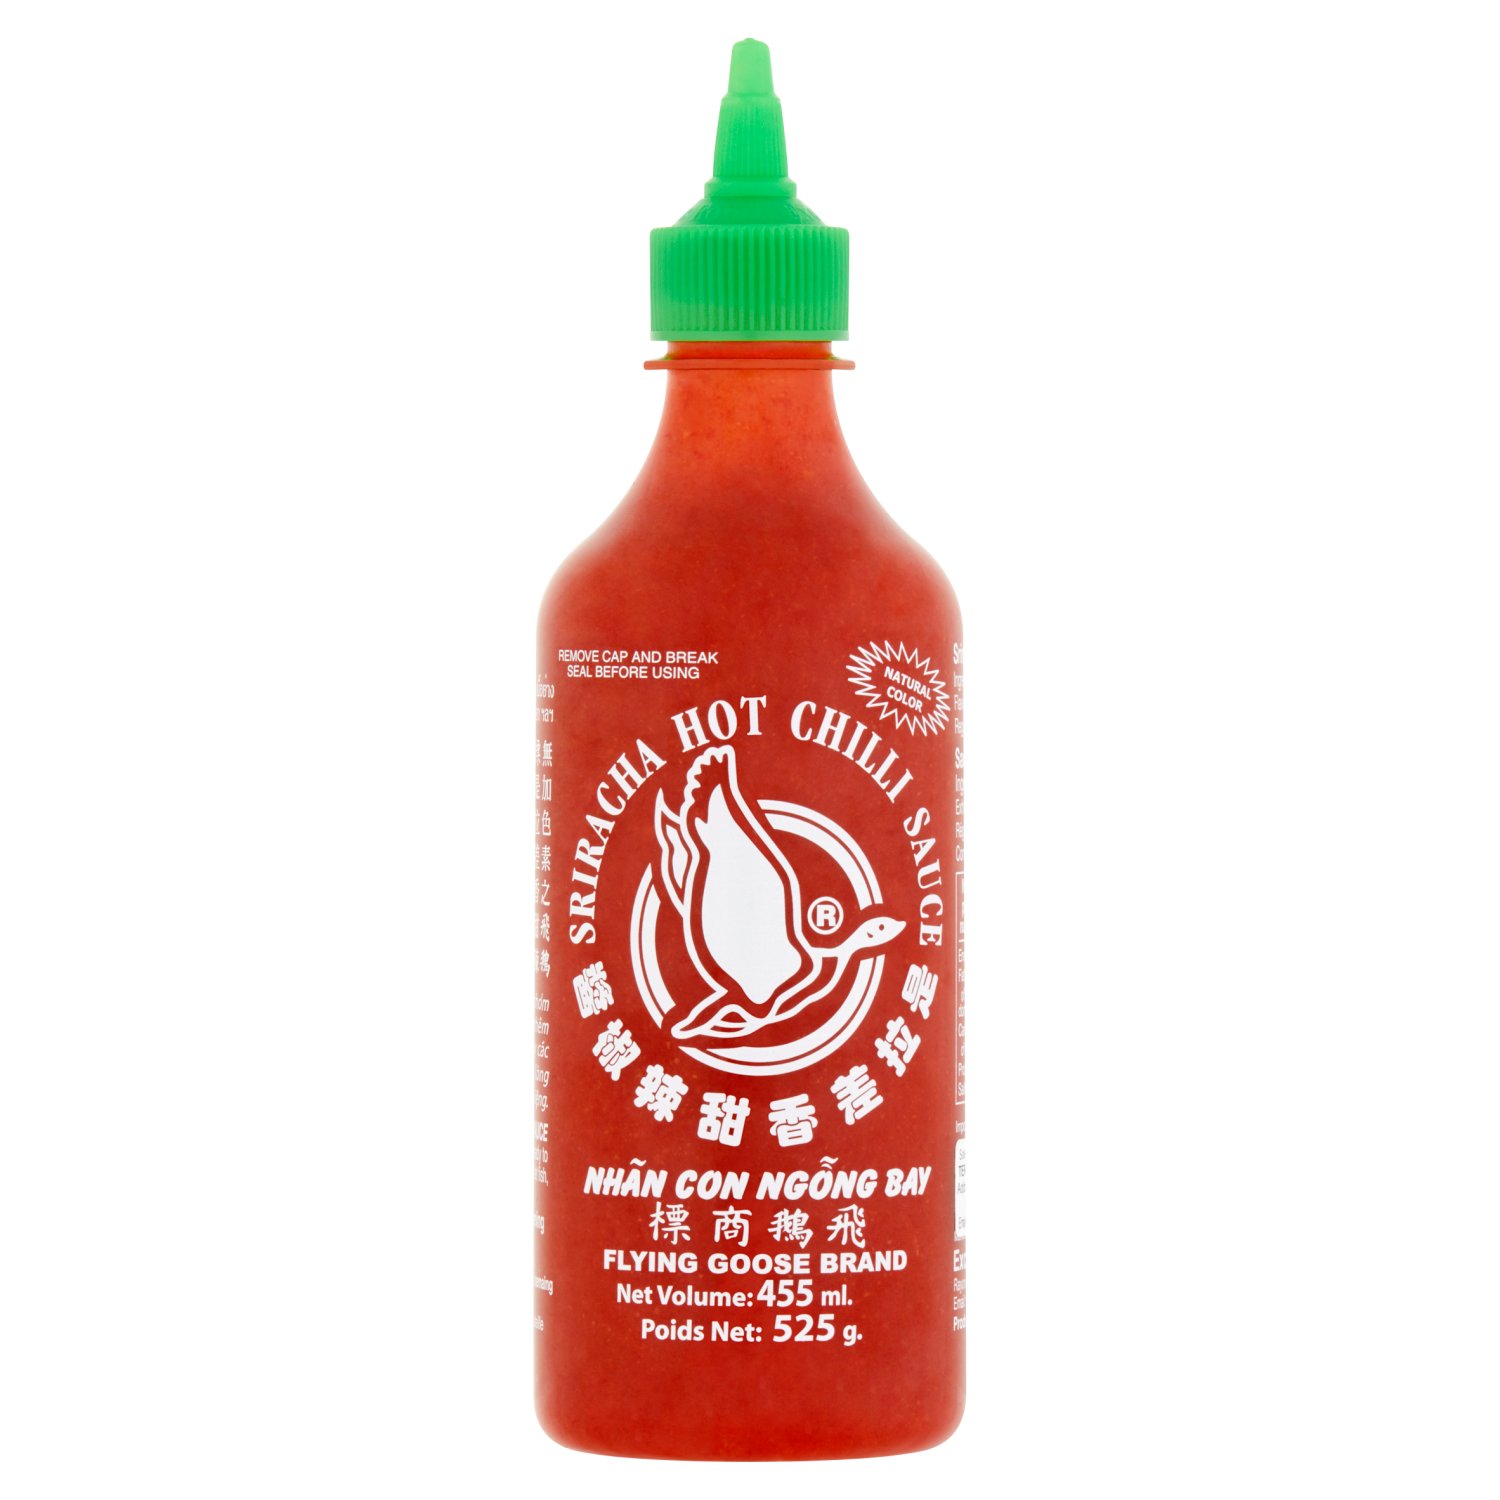 Sriracha Hot Chilli Sauce is made from sun ripen chilli, ready to use with roasted, cold meat, cutlet fish, egg roll and salad.